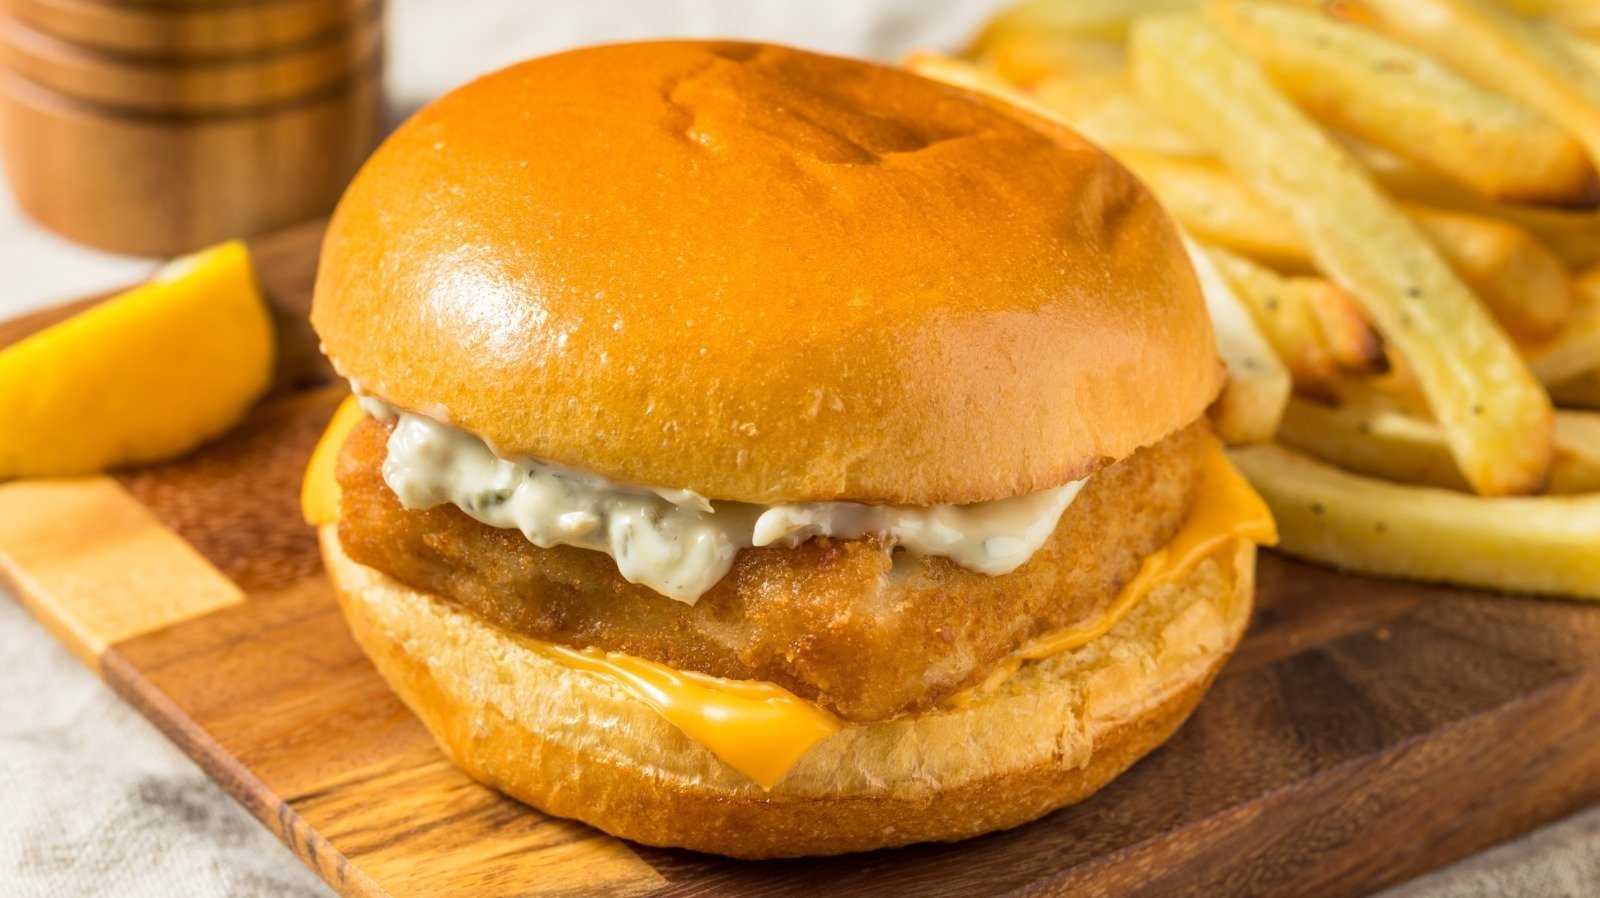 35% Think This Fast-Food Chain Has The Worst Fish Sandwich